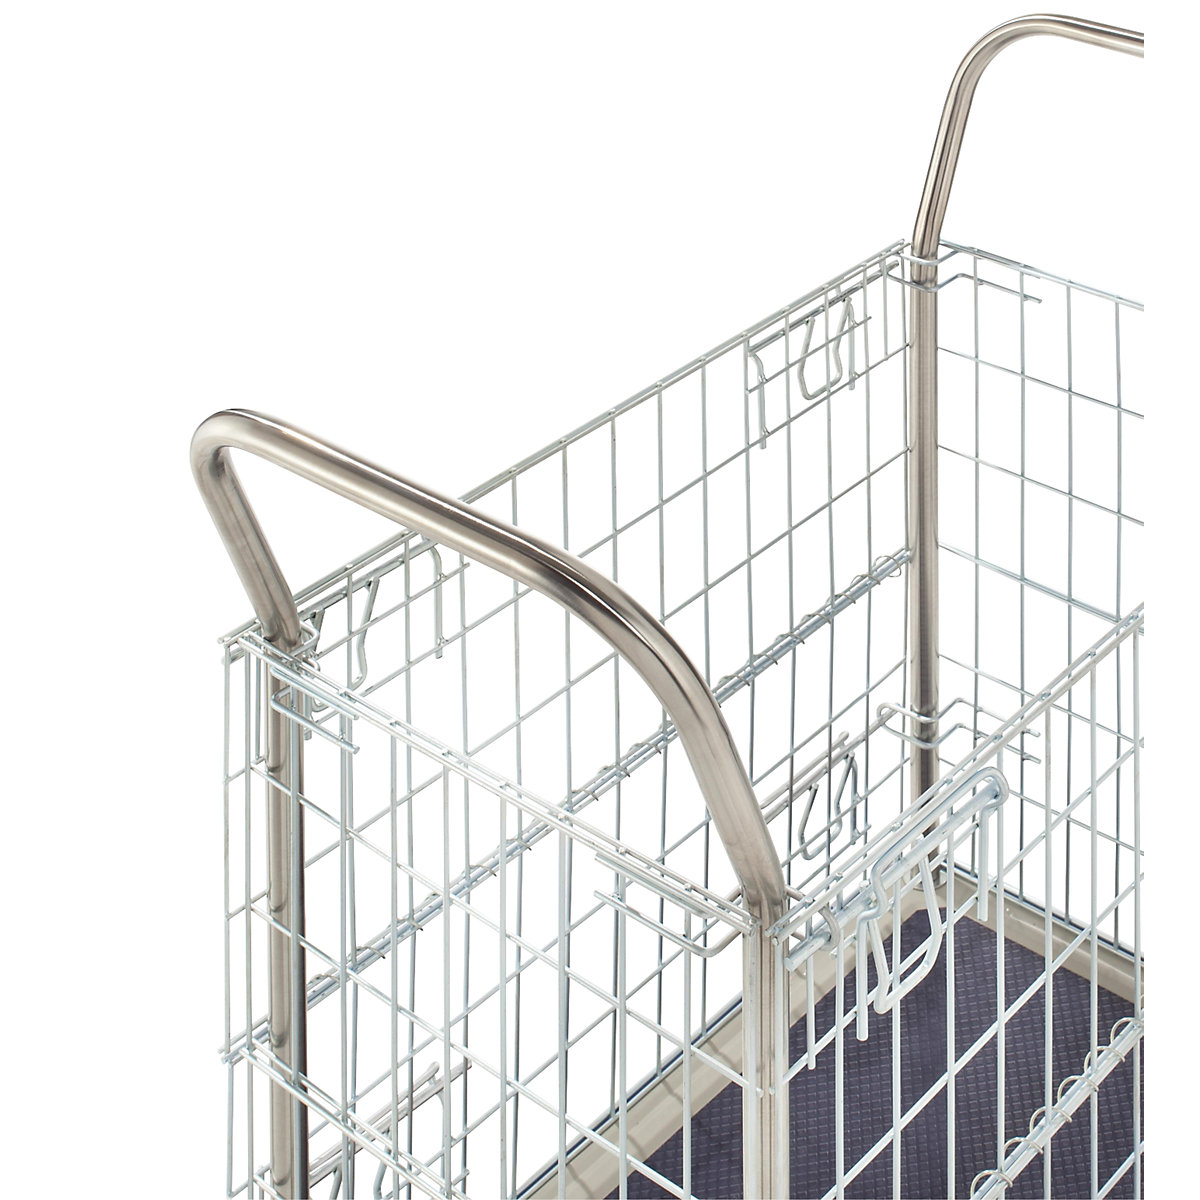 Mesh trolley, zinc plated mesh sides (Product illustration 5)-4